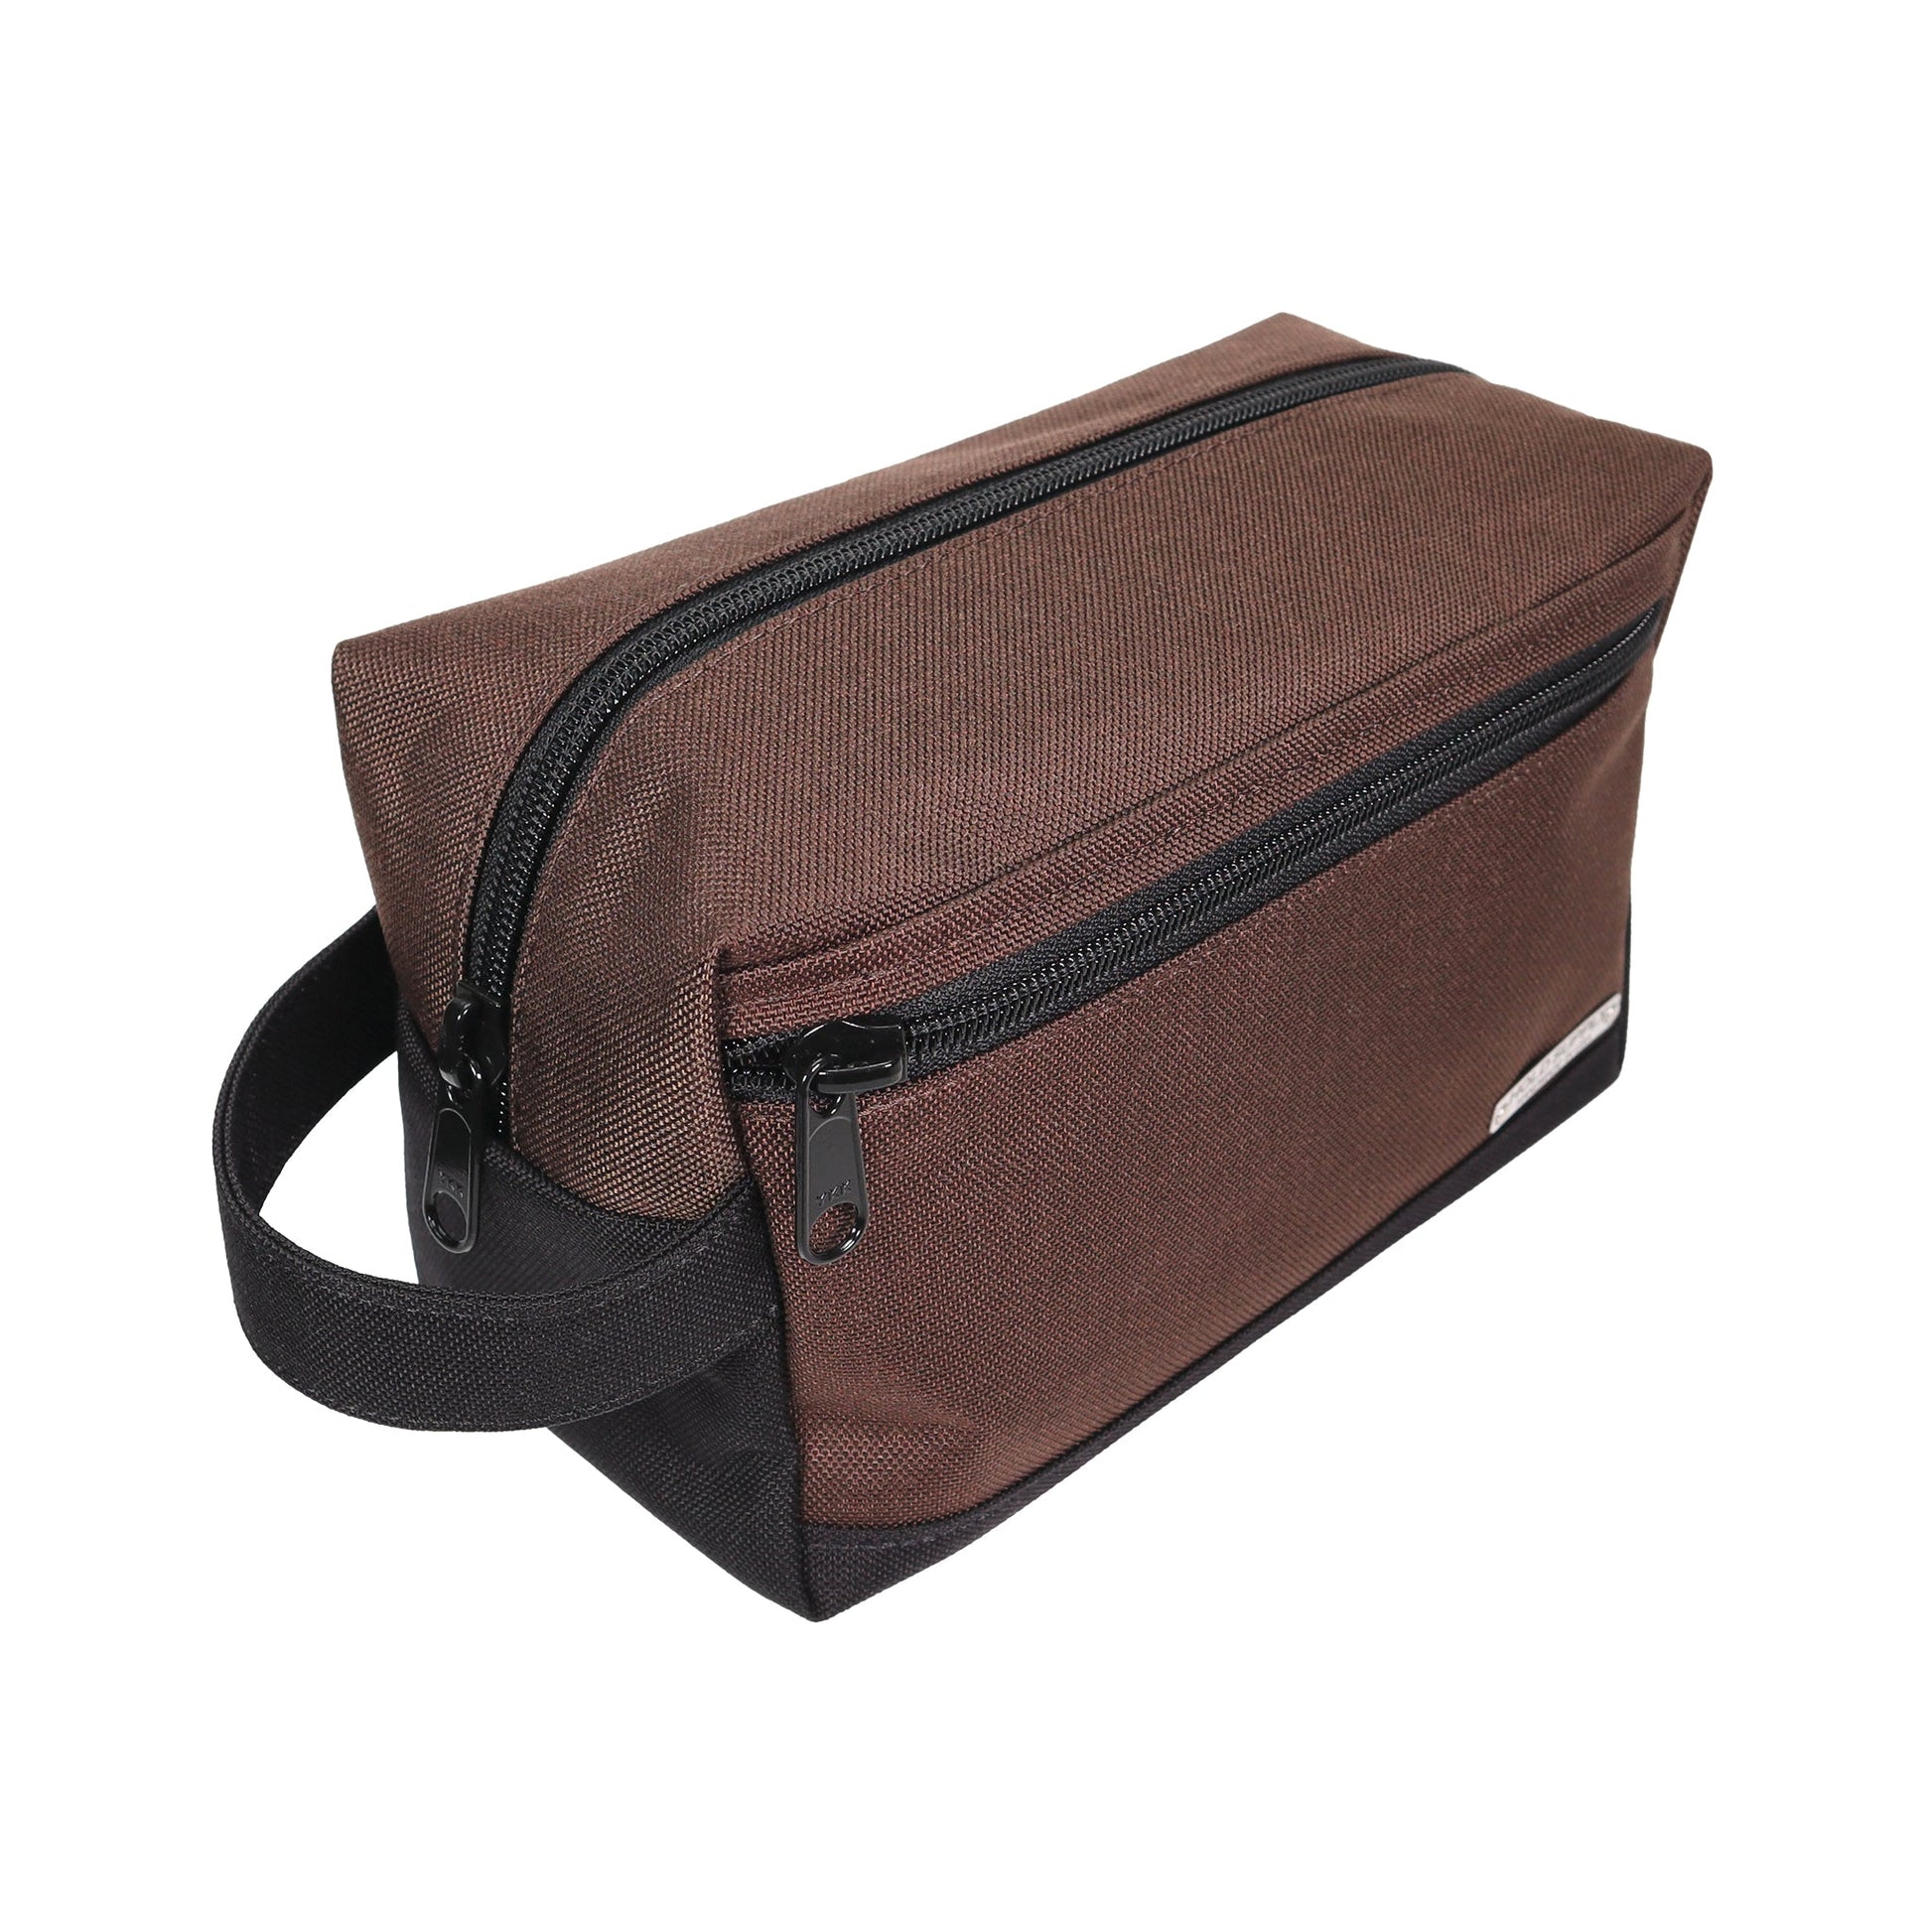 Brown and Black Tall Canvas Toiletry Bag